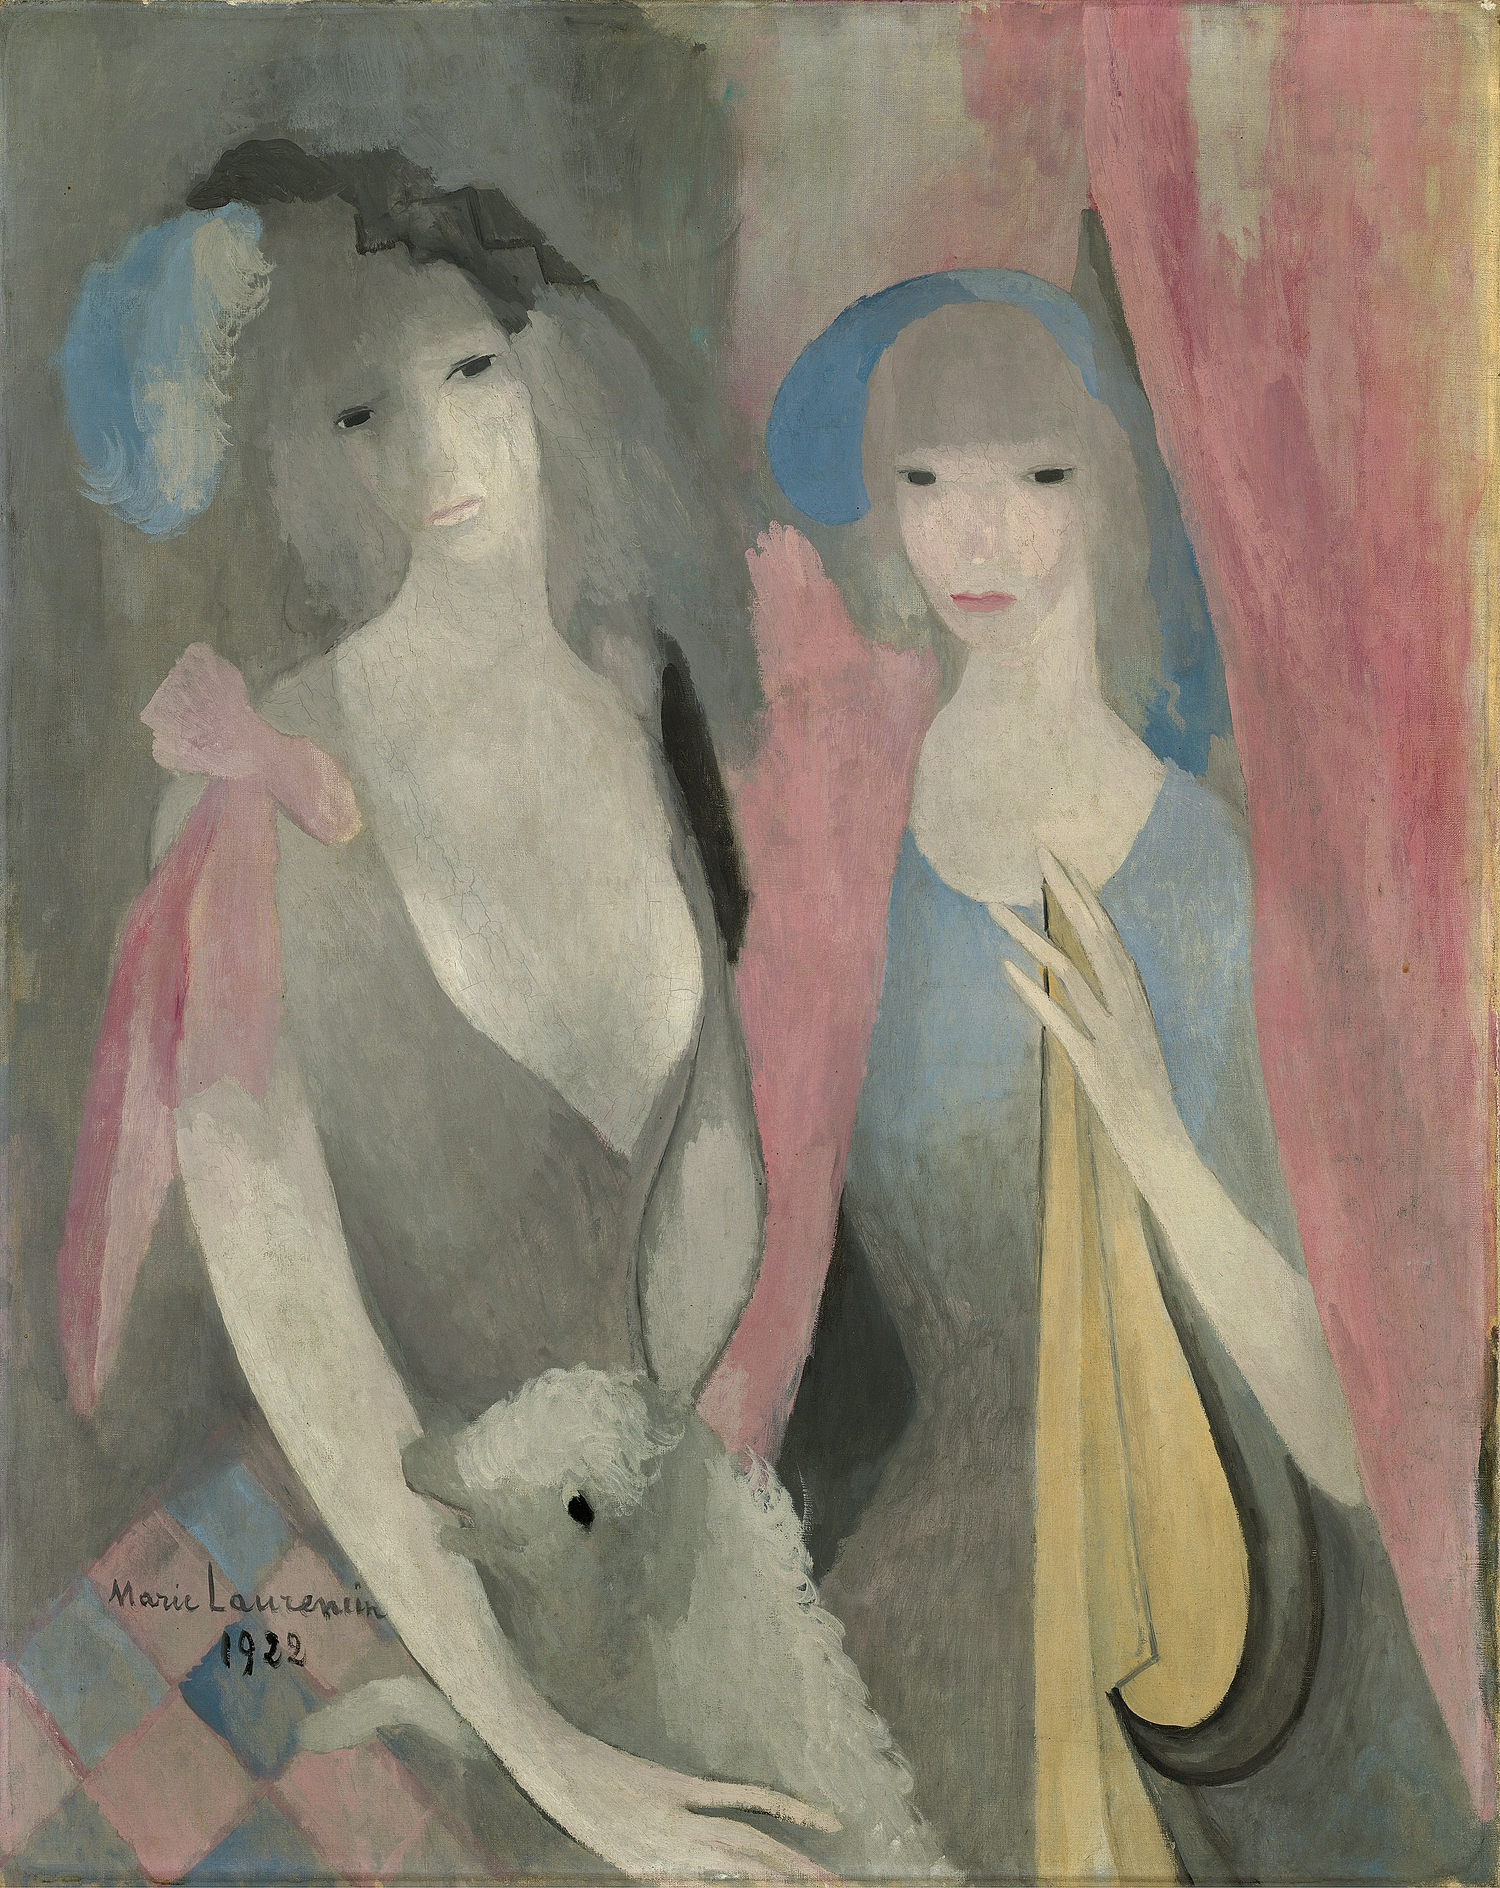 Marie Laurencin, The Shepherdesses (Les bergères), 1922. Oil on canvas. Private Collection. © Fondation Foujita / Artists Rights Society (ARS), New York / ADAGP, Paris 2023